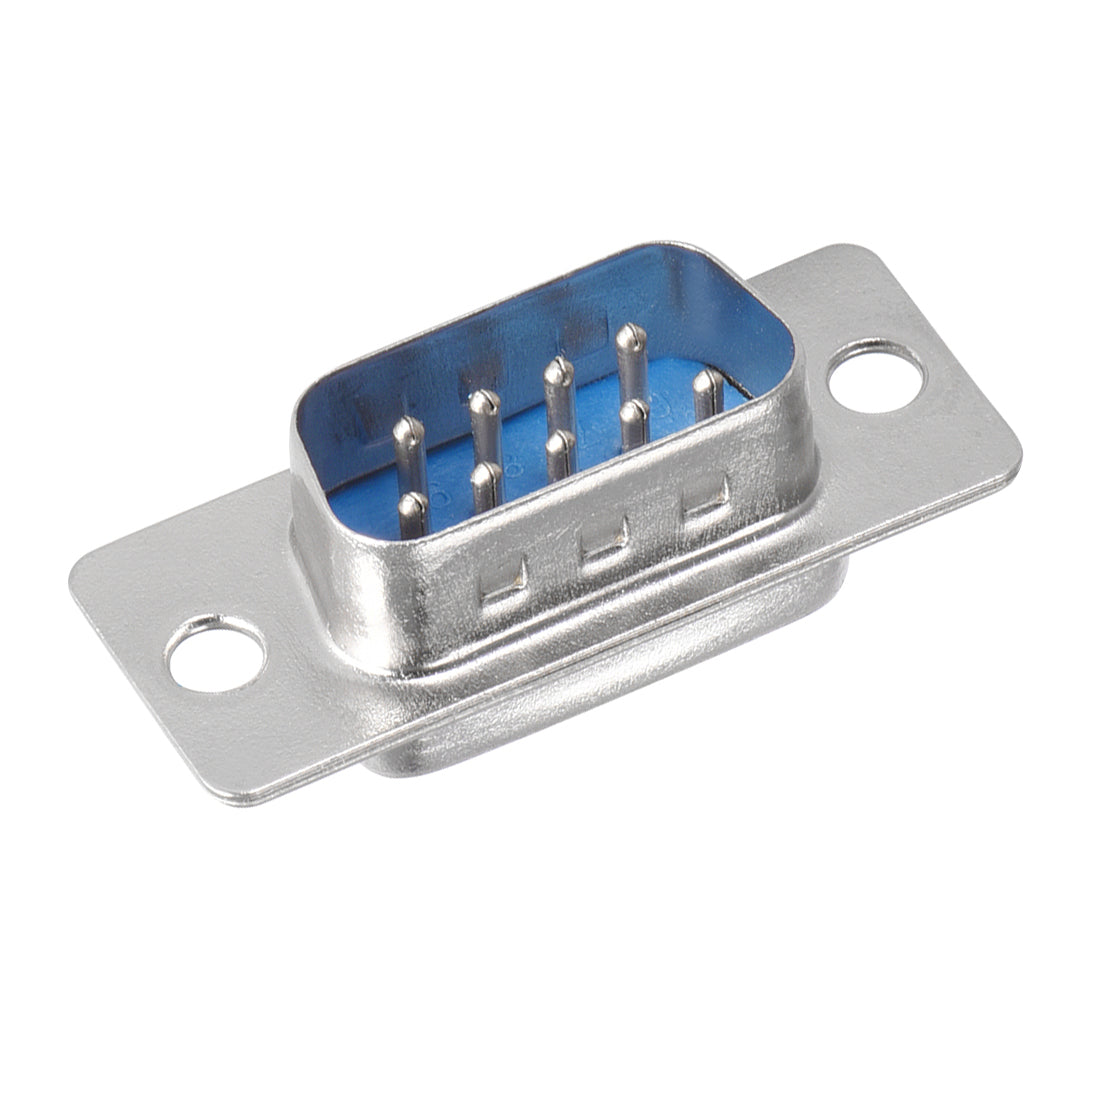 uxcell Uxcell D-sub Connector Male Plug 9-pin 2-row Port Terminal Breakout Solder Type for Mechanical Equipment CNC Computers Blue 1pcs